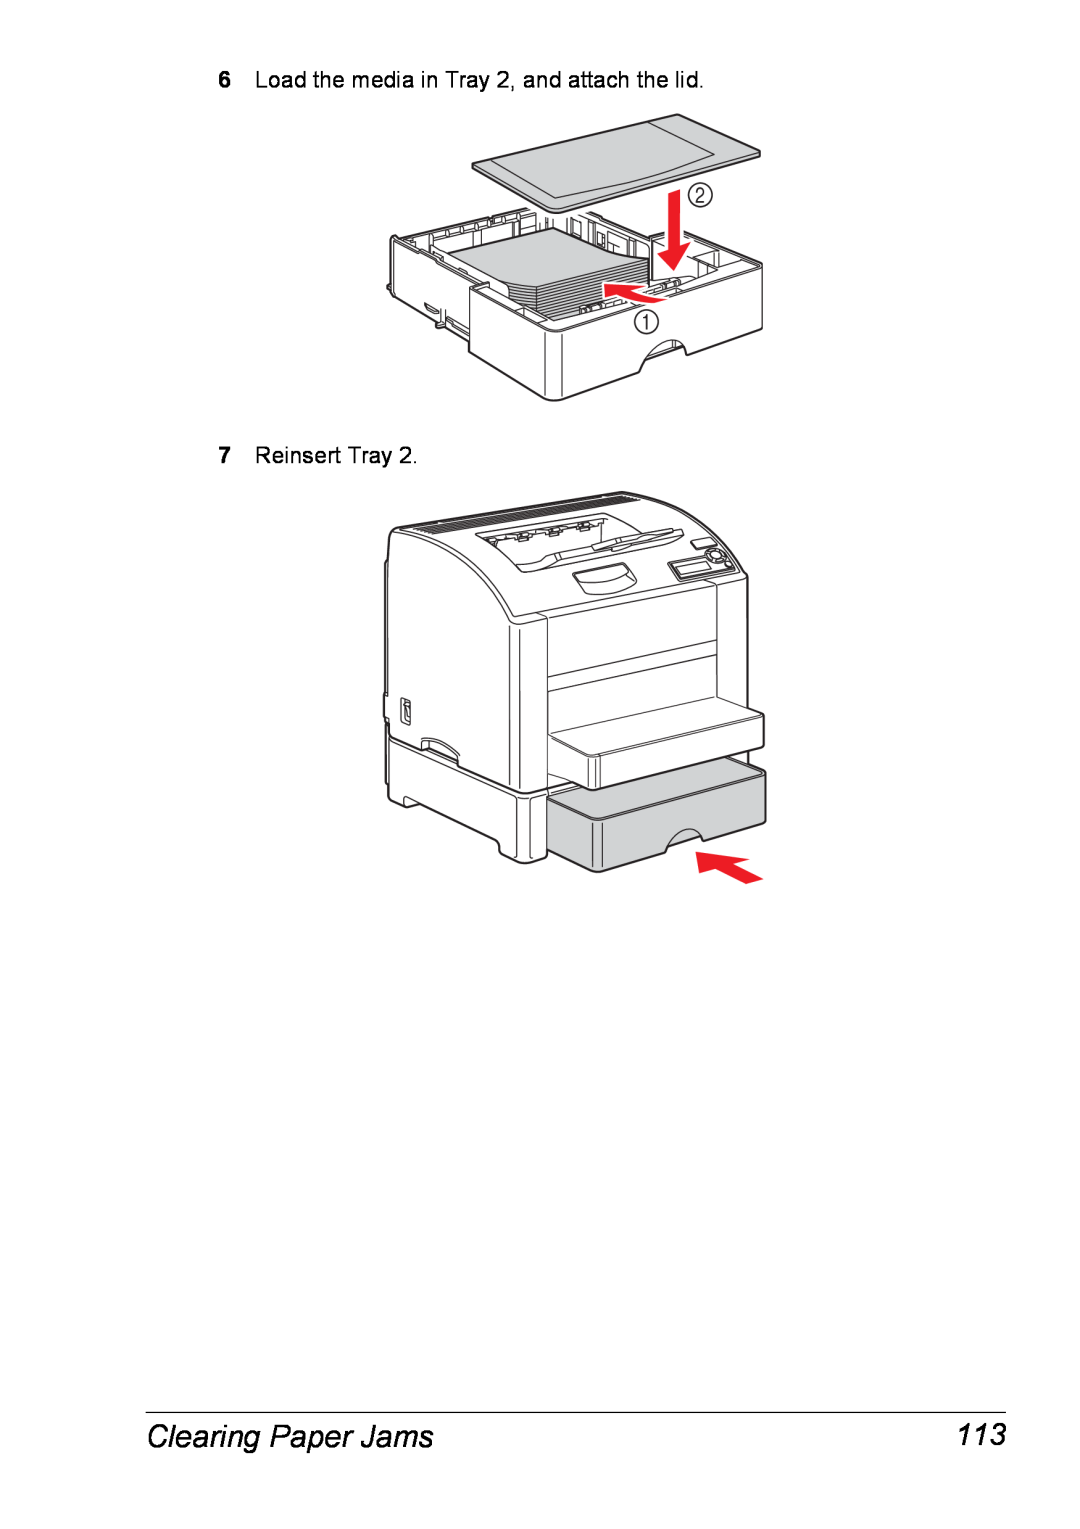 Xerox 6120 manual Clearing Paper Jams, Load the media in Tray 2, and attach the lid 7 Reinsert Tray 